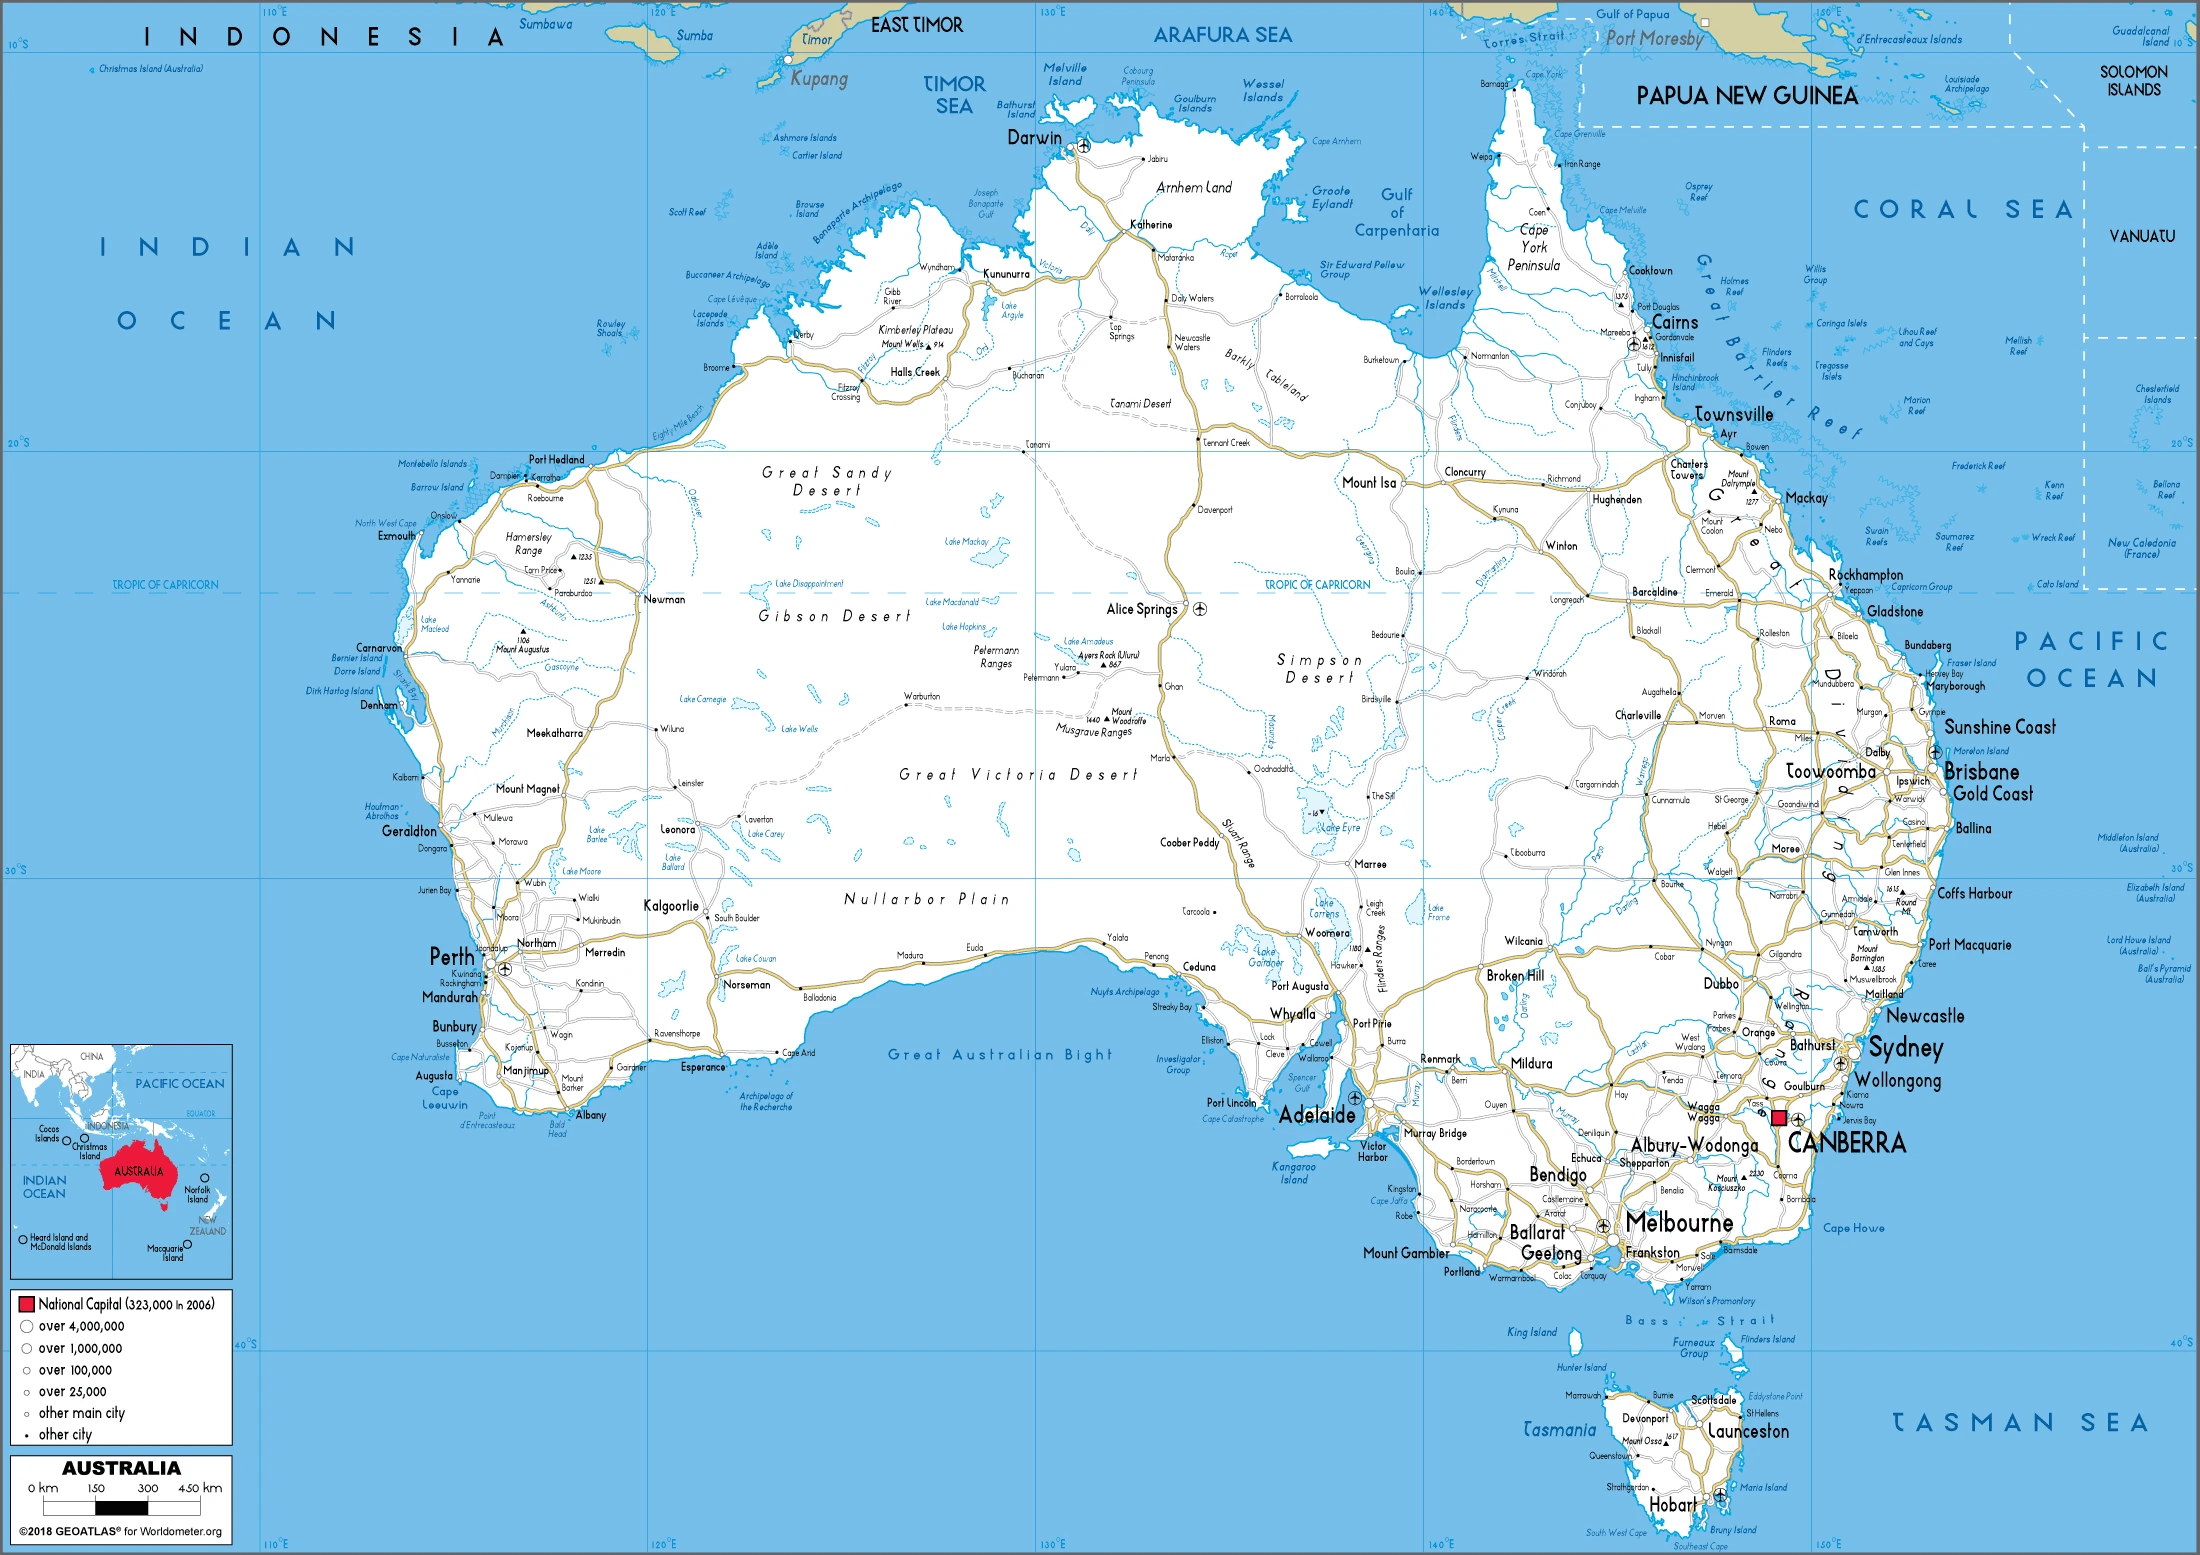 The route plan of the Australian roadways.